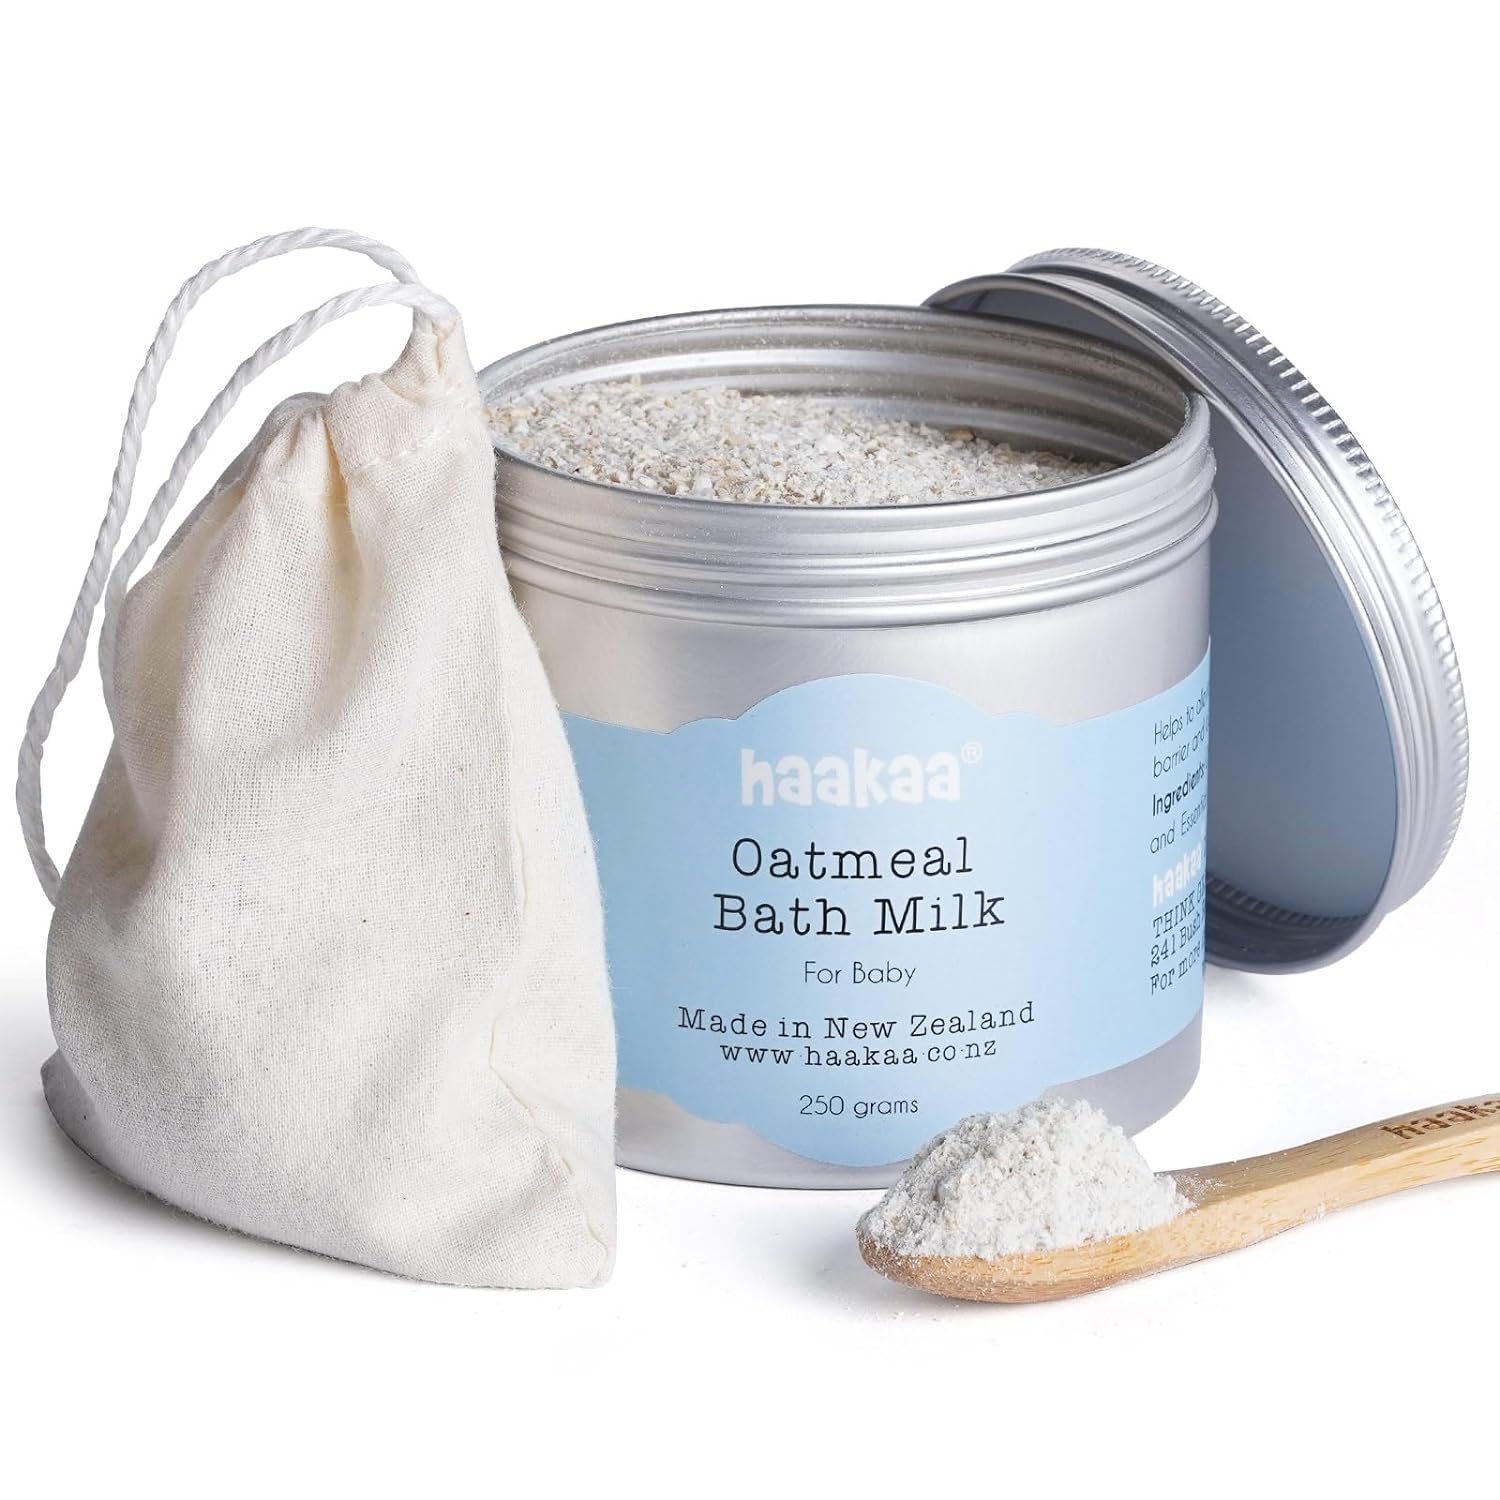 haakaa Oatmeal Baby Bath Milk, Gentle for Baby, Natural Colloidal Oatmeal, Hypoallergenic Bath Milk for Baby's Sensitive Skin, Made in New Zealand 250g